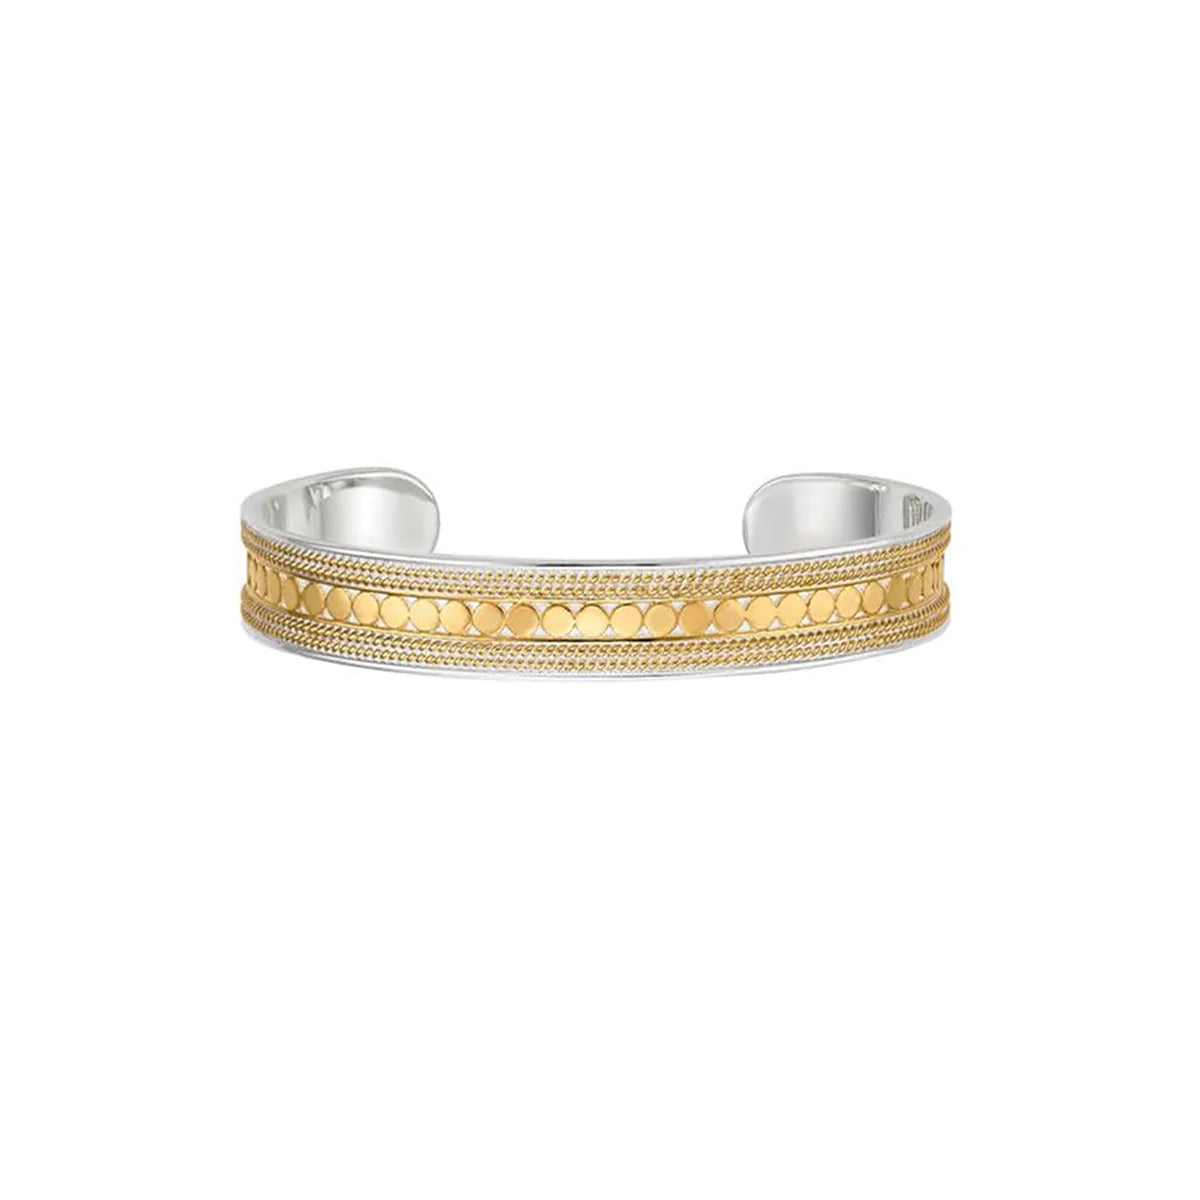 Gold dotted cuff with rope detailing